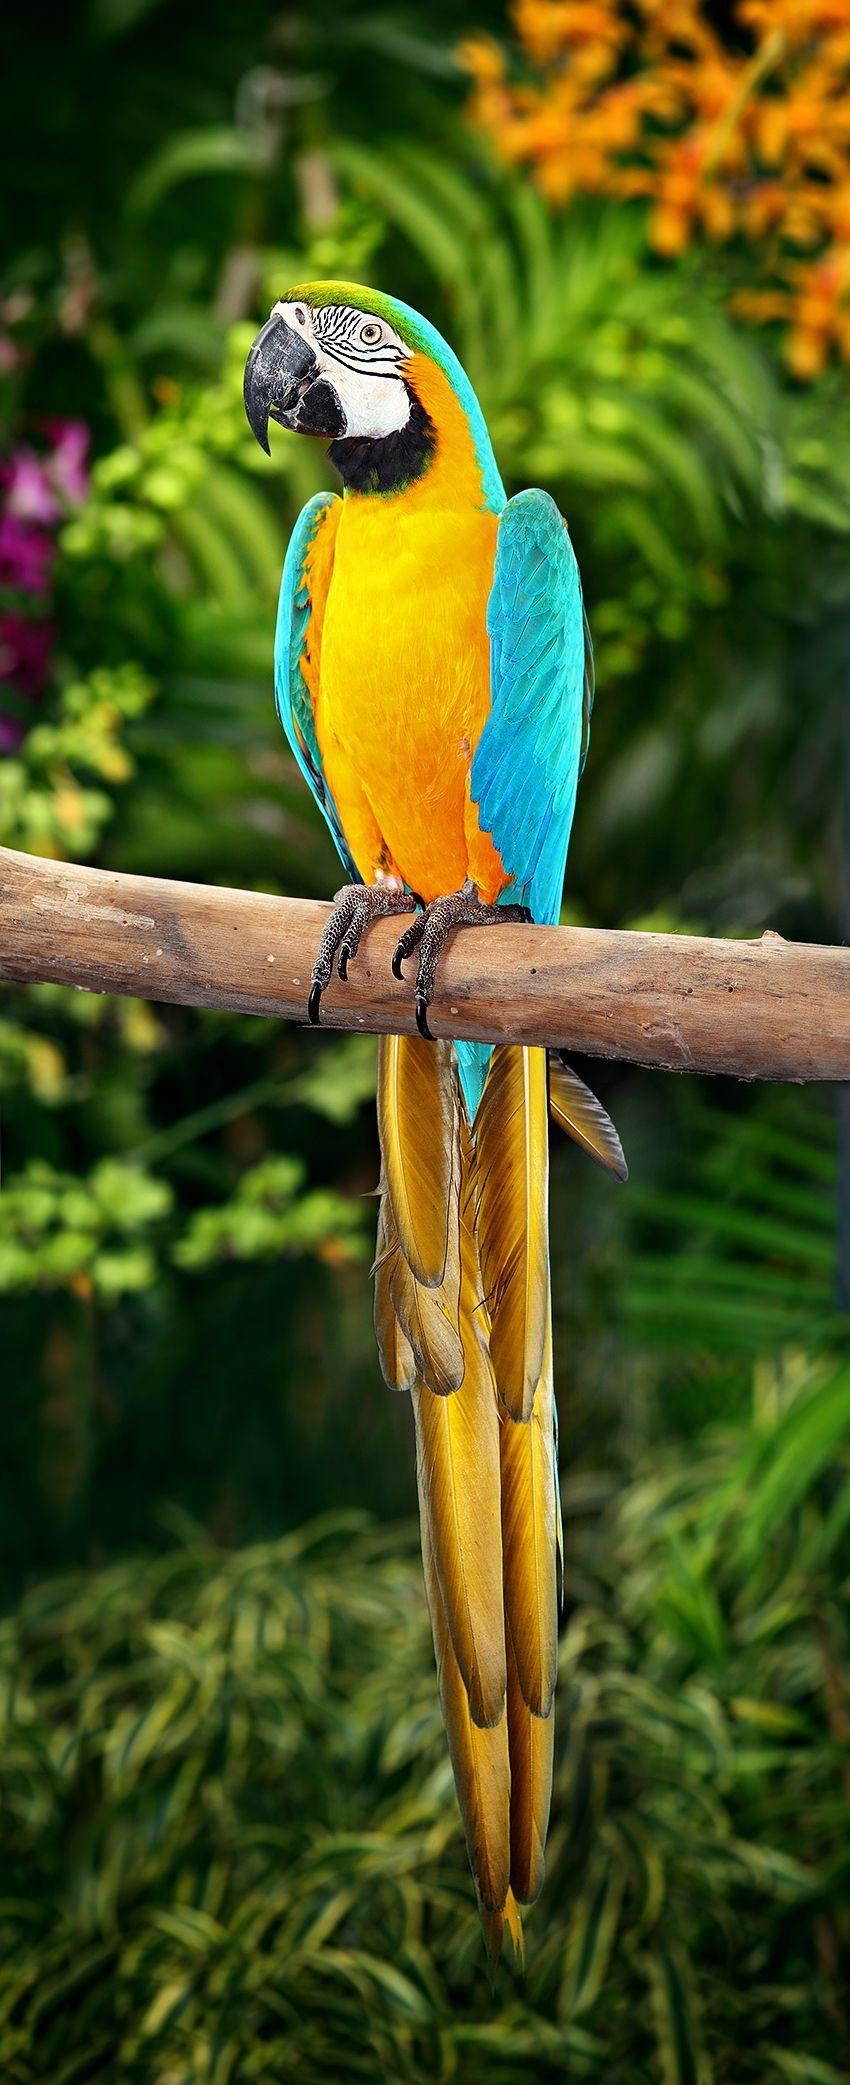 Gold and Blue Bird Logo - Blue-and-yellow macaw